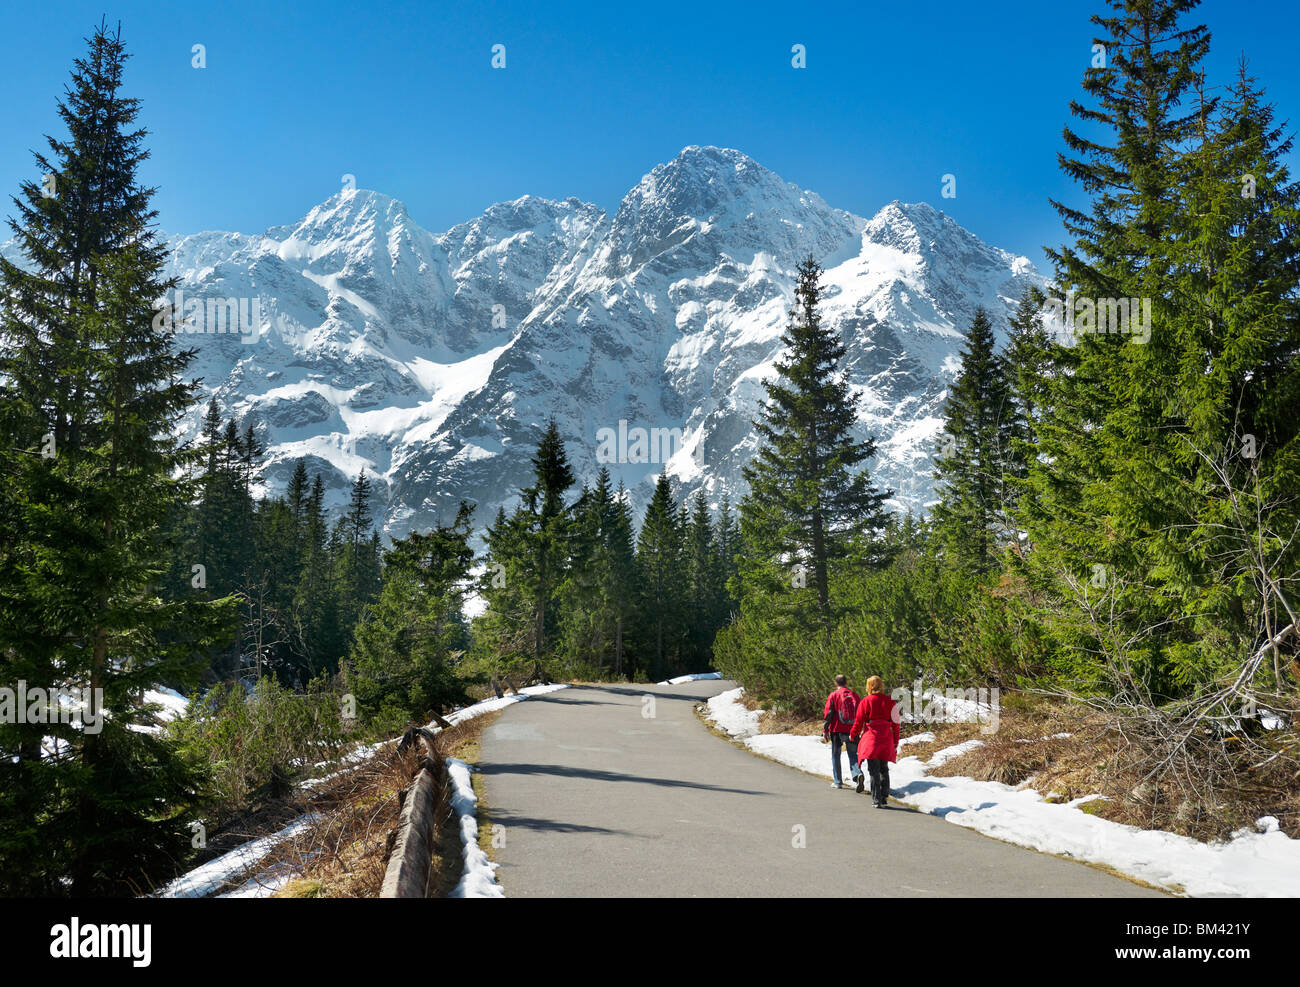 Route vers le lac Morskie Oko, Tatras, Pologne Banque D'Images